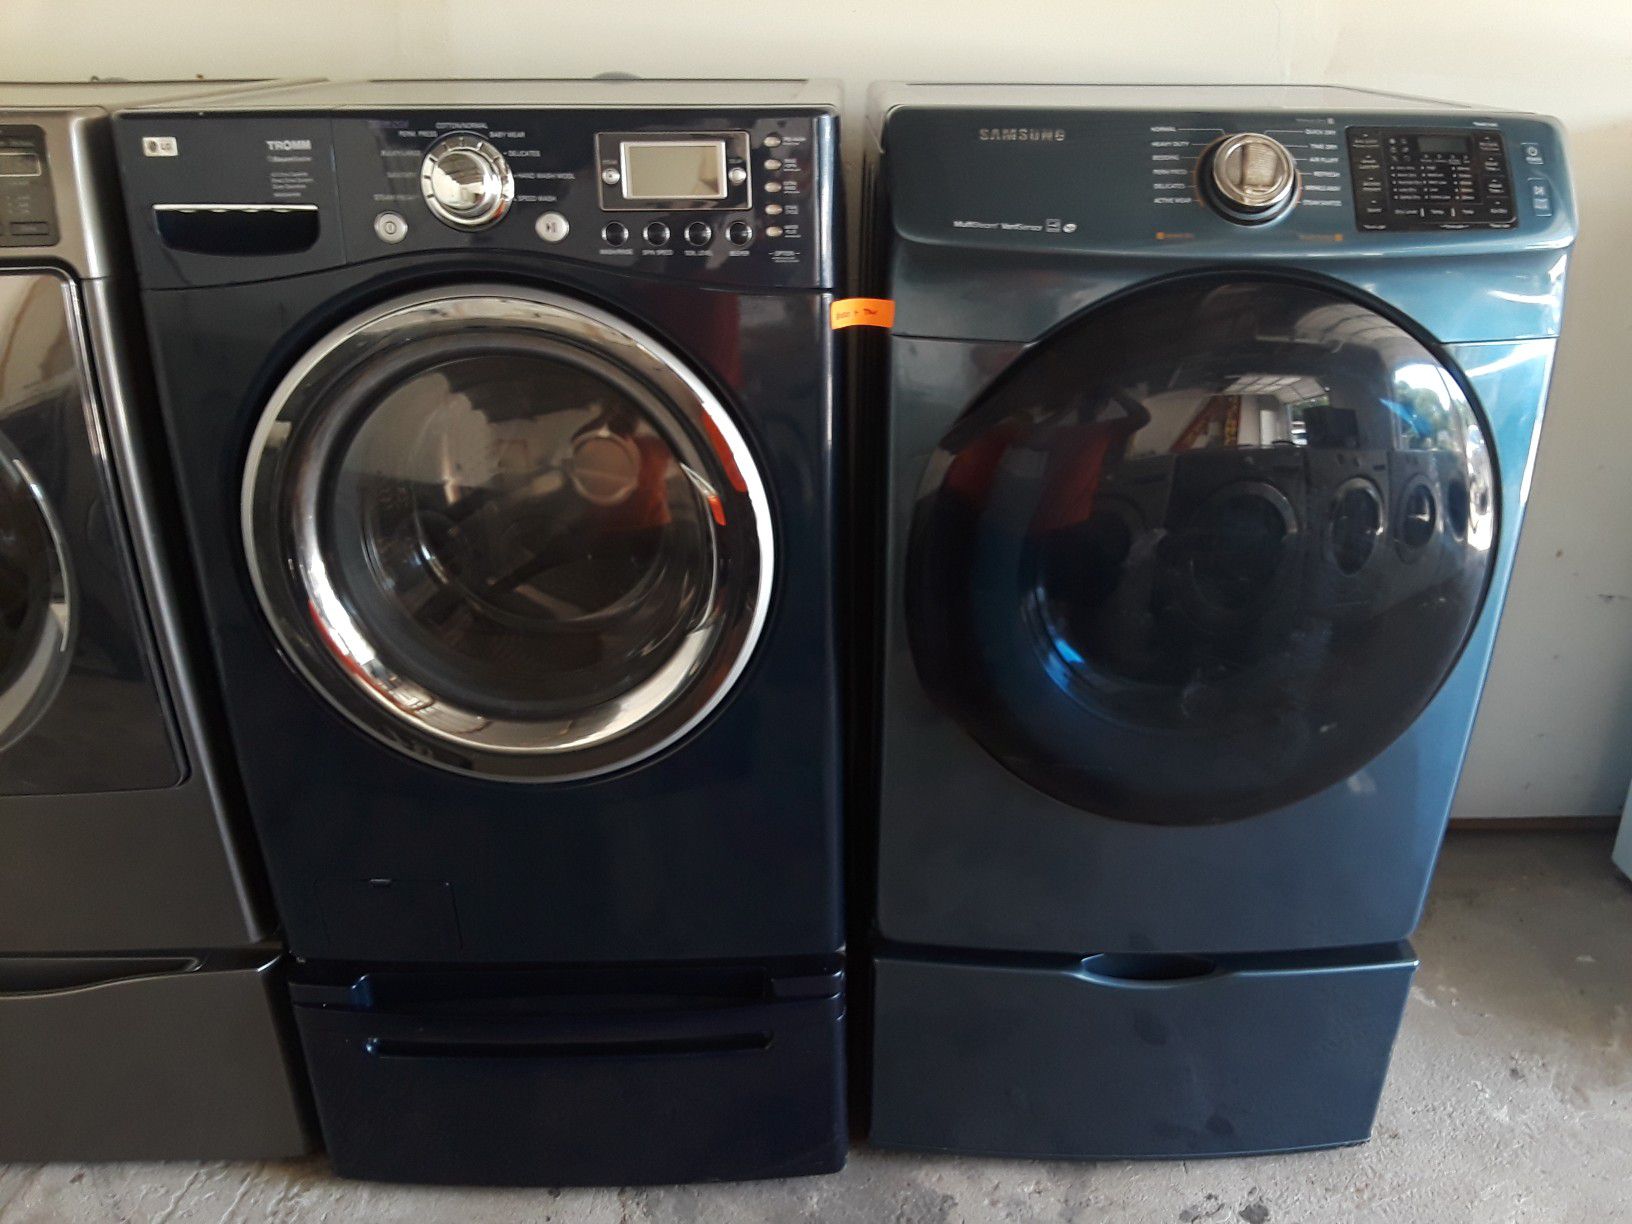 LG Washer And Samsung Electric Dryer